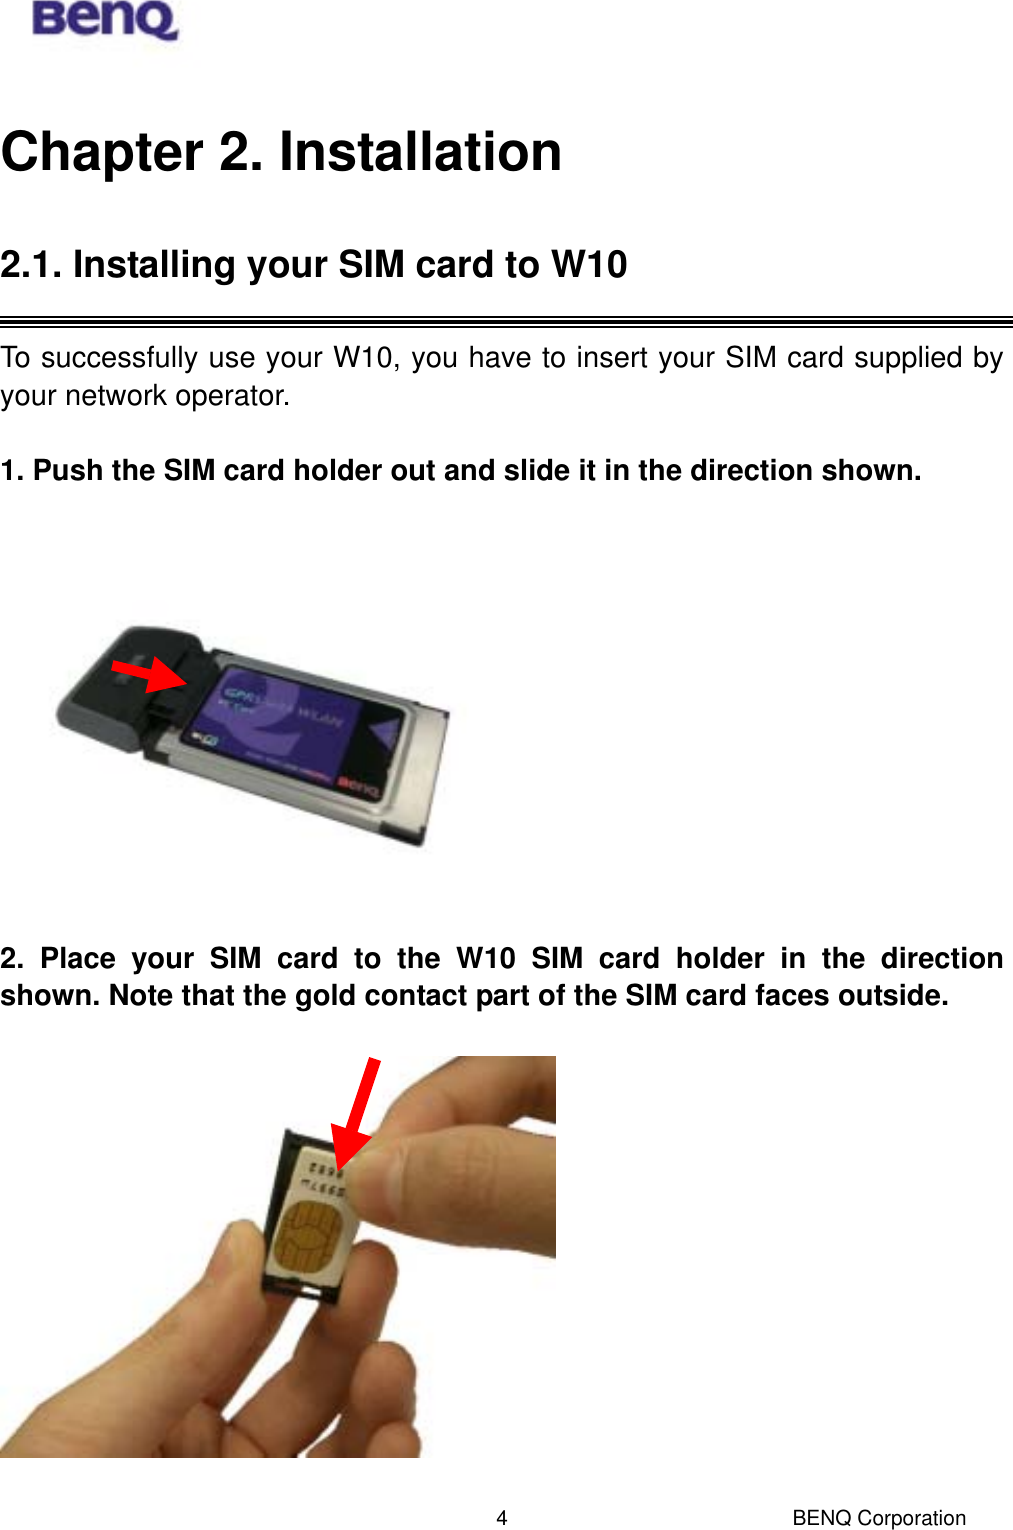  BENQ Corporation 4Chapter 2. Installation 2.1. Installing your SIM card to W10  To successfully use your W10, you have to insert your SIM card supplied by your network operator.  1. Push the SIM card holder out and slide it in the direction shown.    2. Place your SIM card to the W10 SIM card holder in the direction shown. Note that the gold contact part of the SIM card faces outside.    